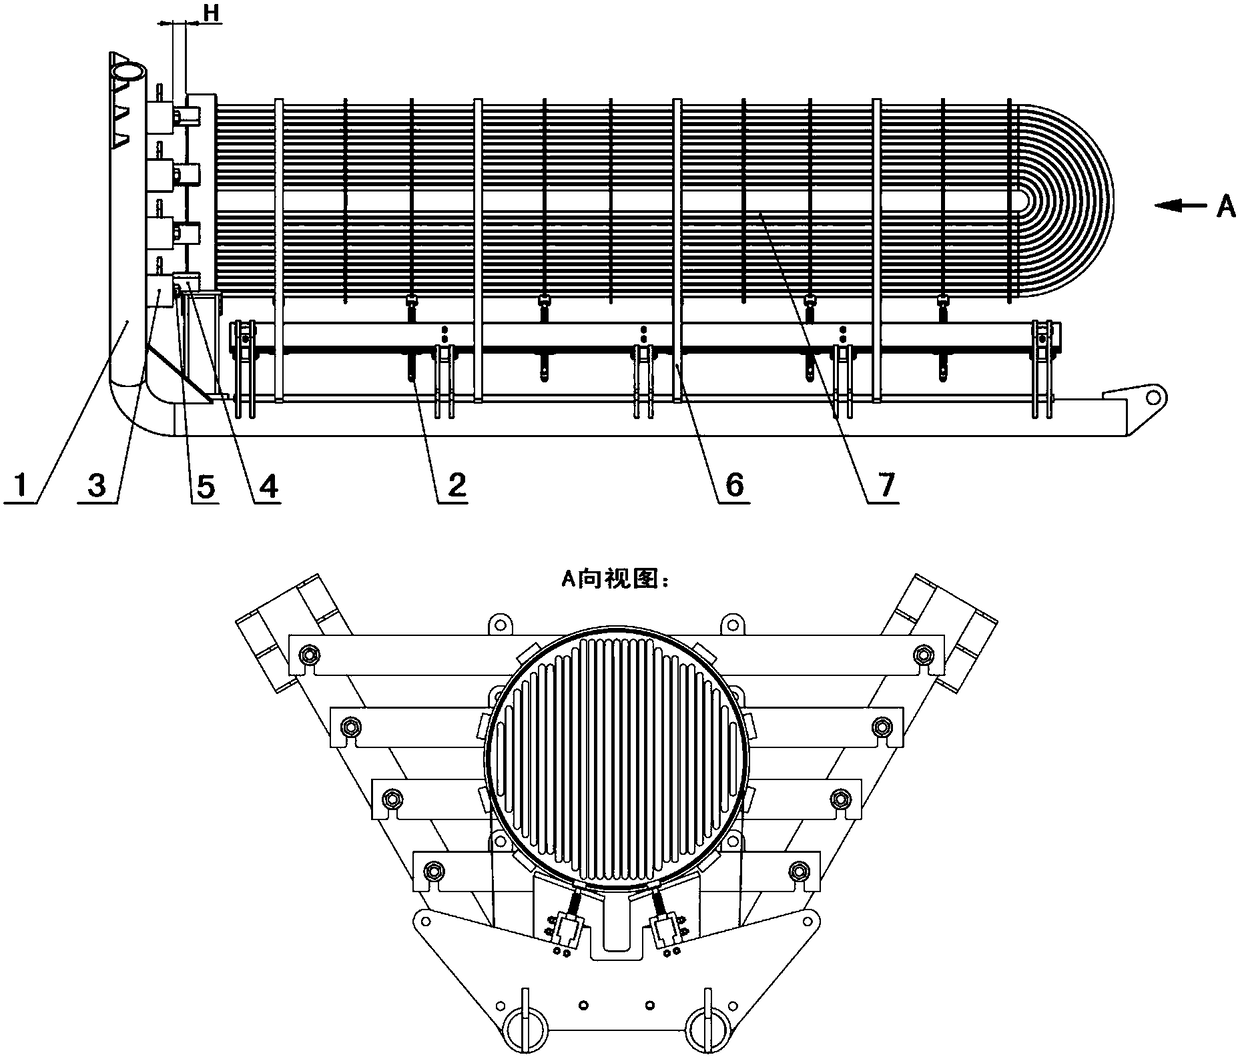 Manufacturing and overturning device for heat exchanger tube bundle assembly